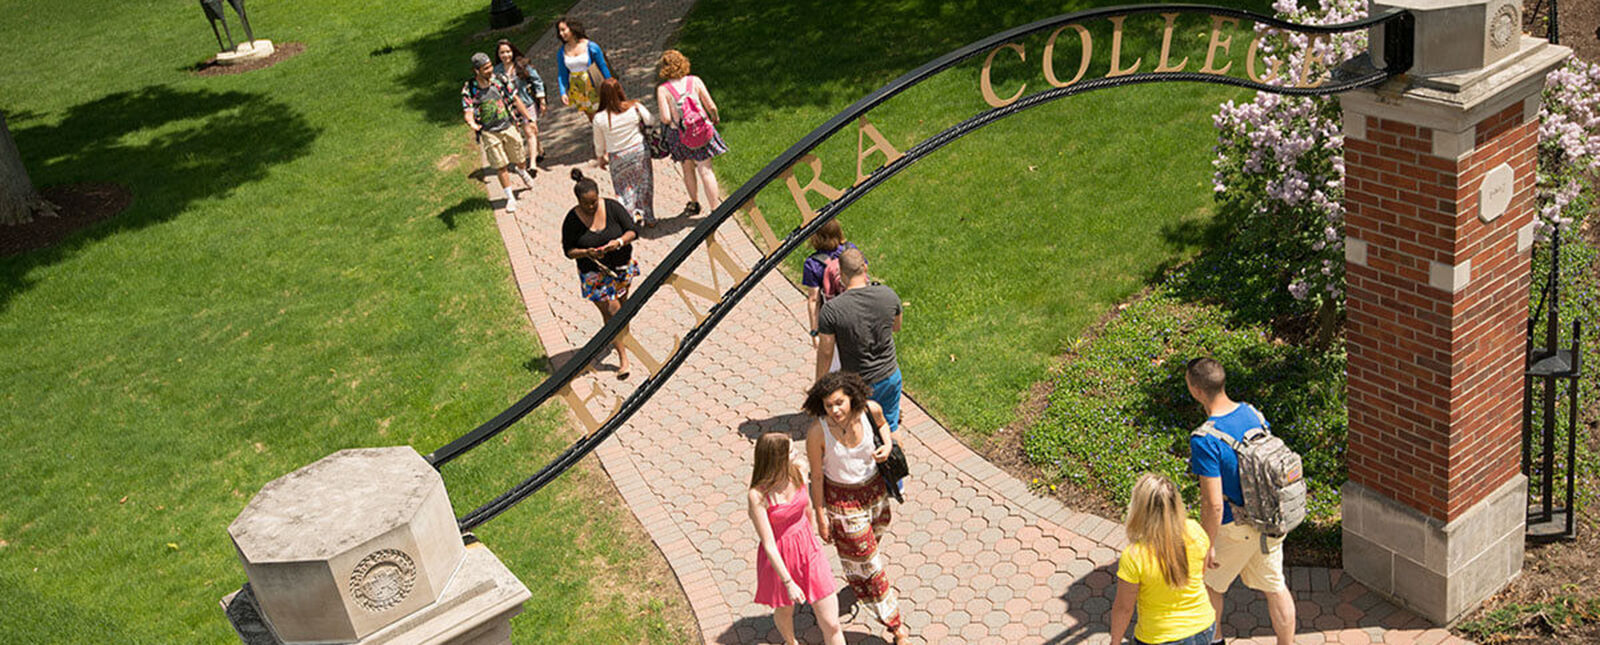 Students make their way to class while passing under an archway that says Elmira College